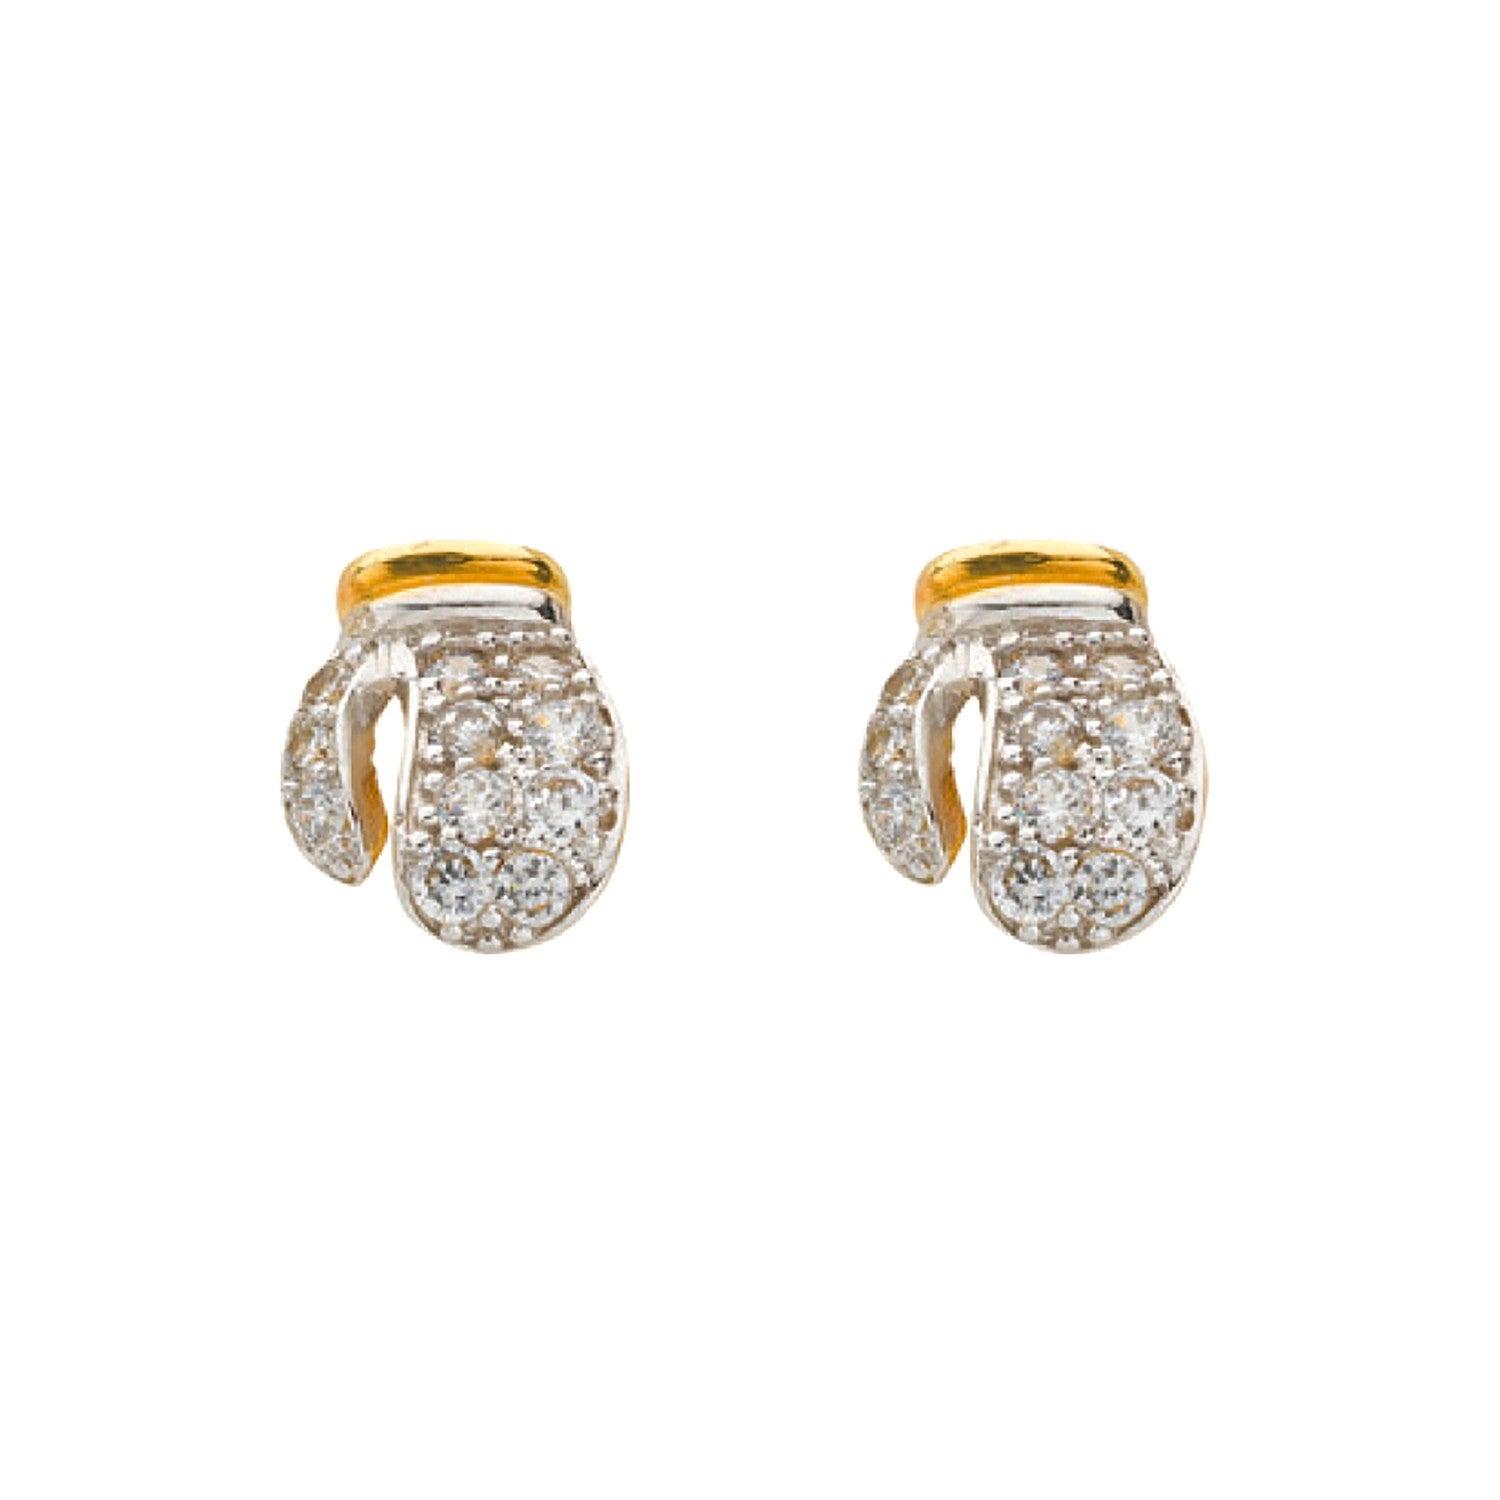 Yellow Gold Cz Boxing Gloves Stud Earrings